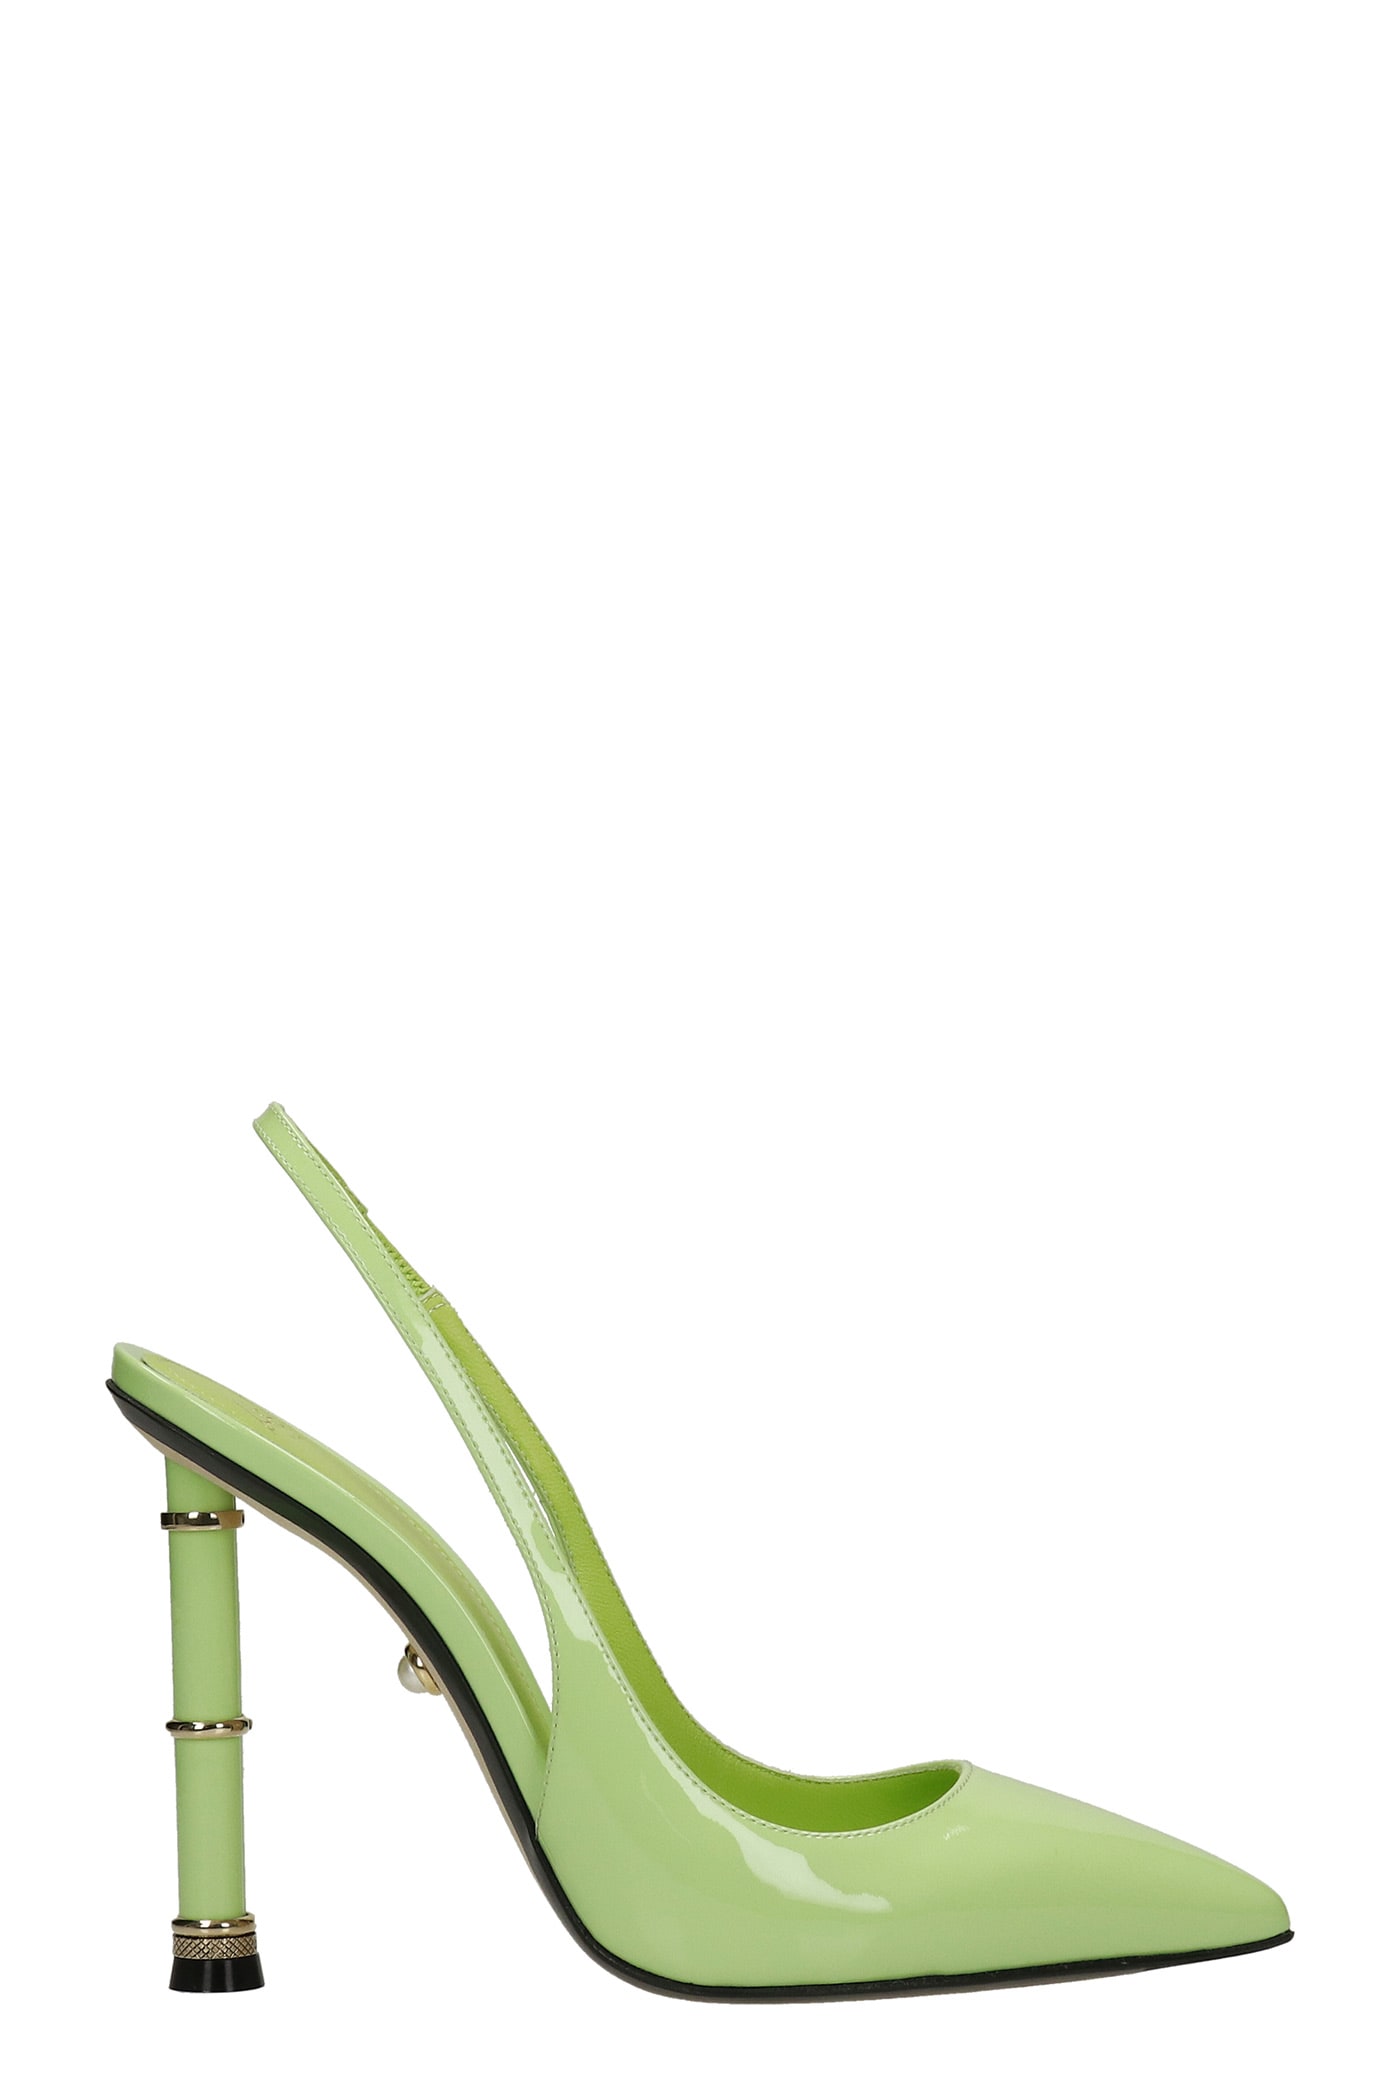 Alevì Valeria 110 Sandals In Green Patent Leather